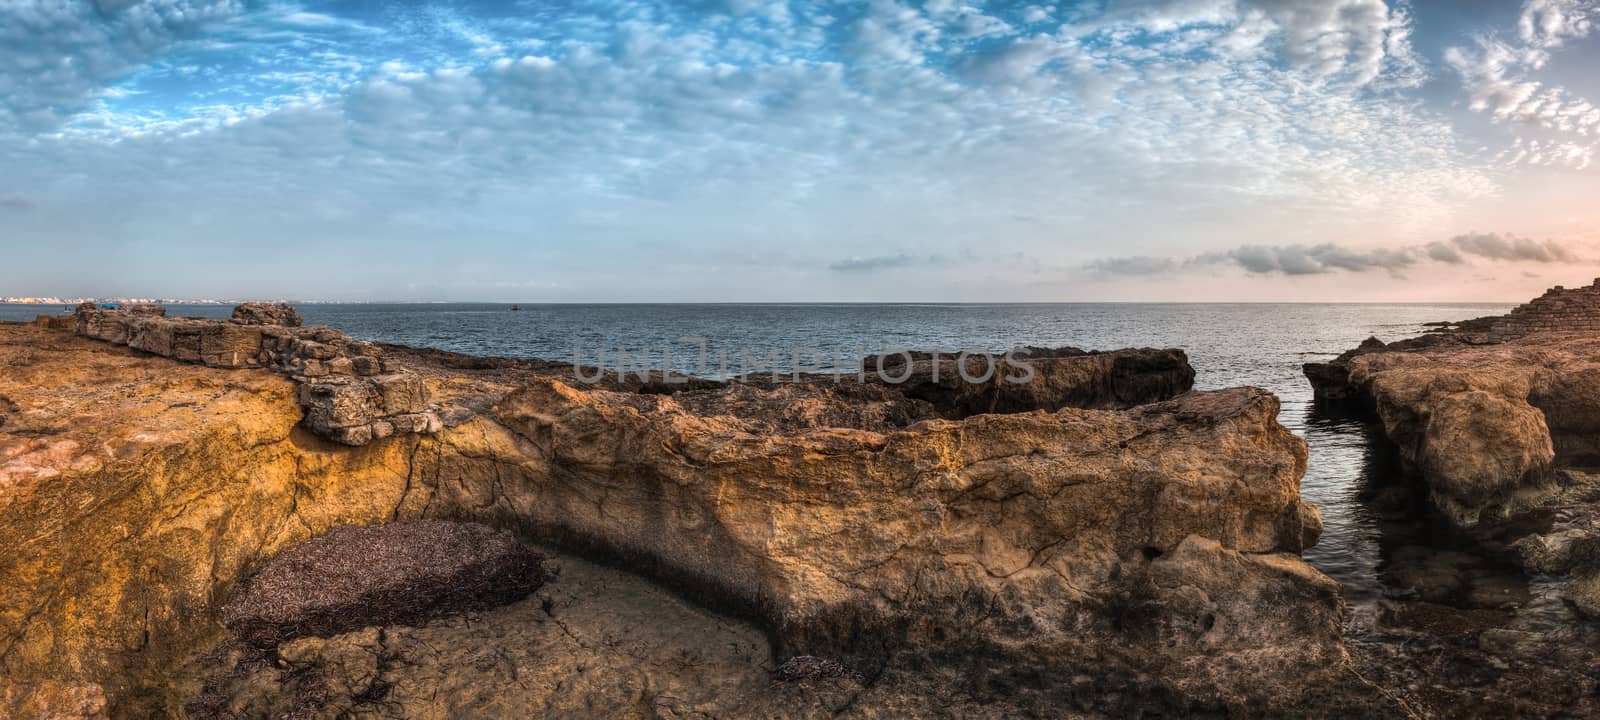 Sunset over the Sea and Rocky Coast by Kayco